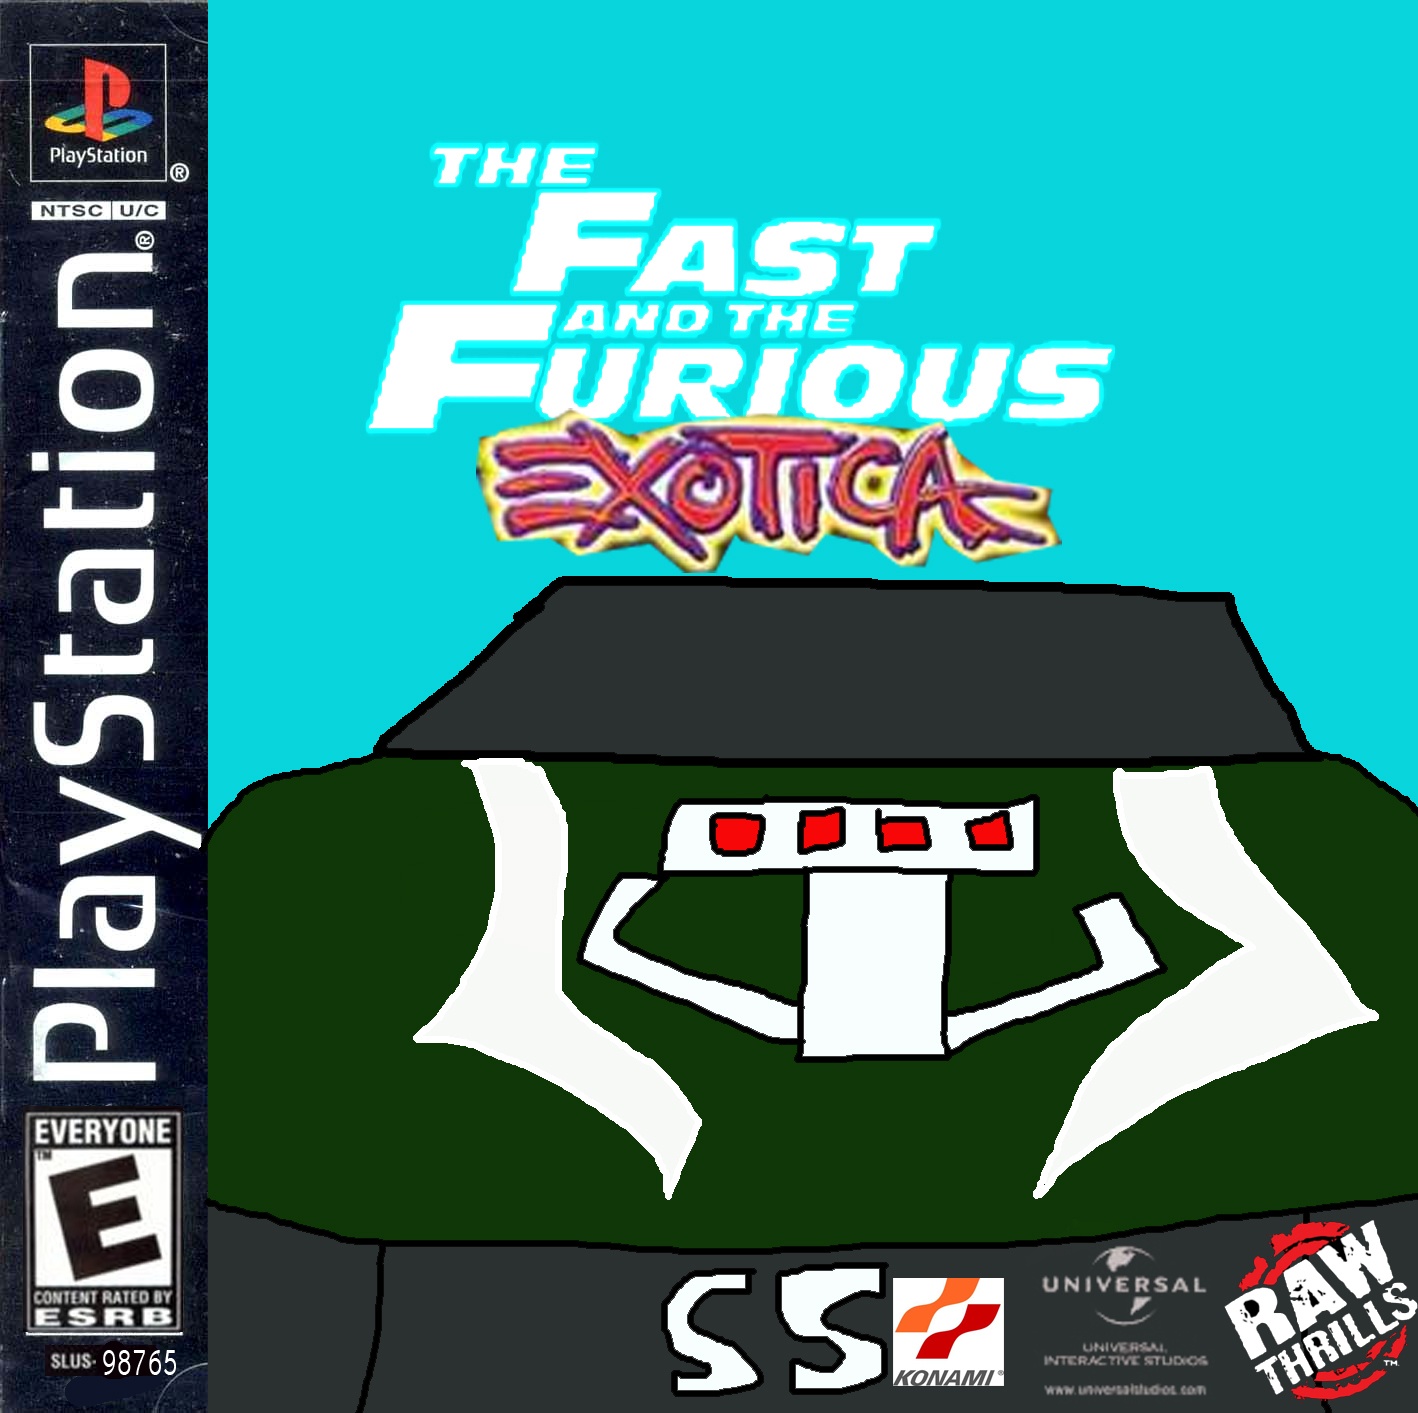 The Fast and The Furious: Exotica box cover